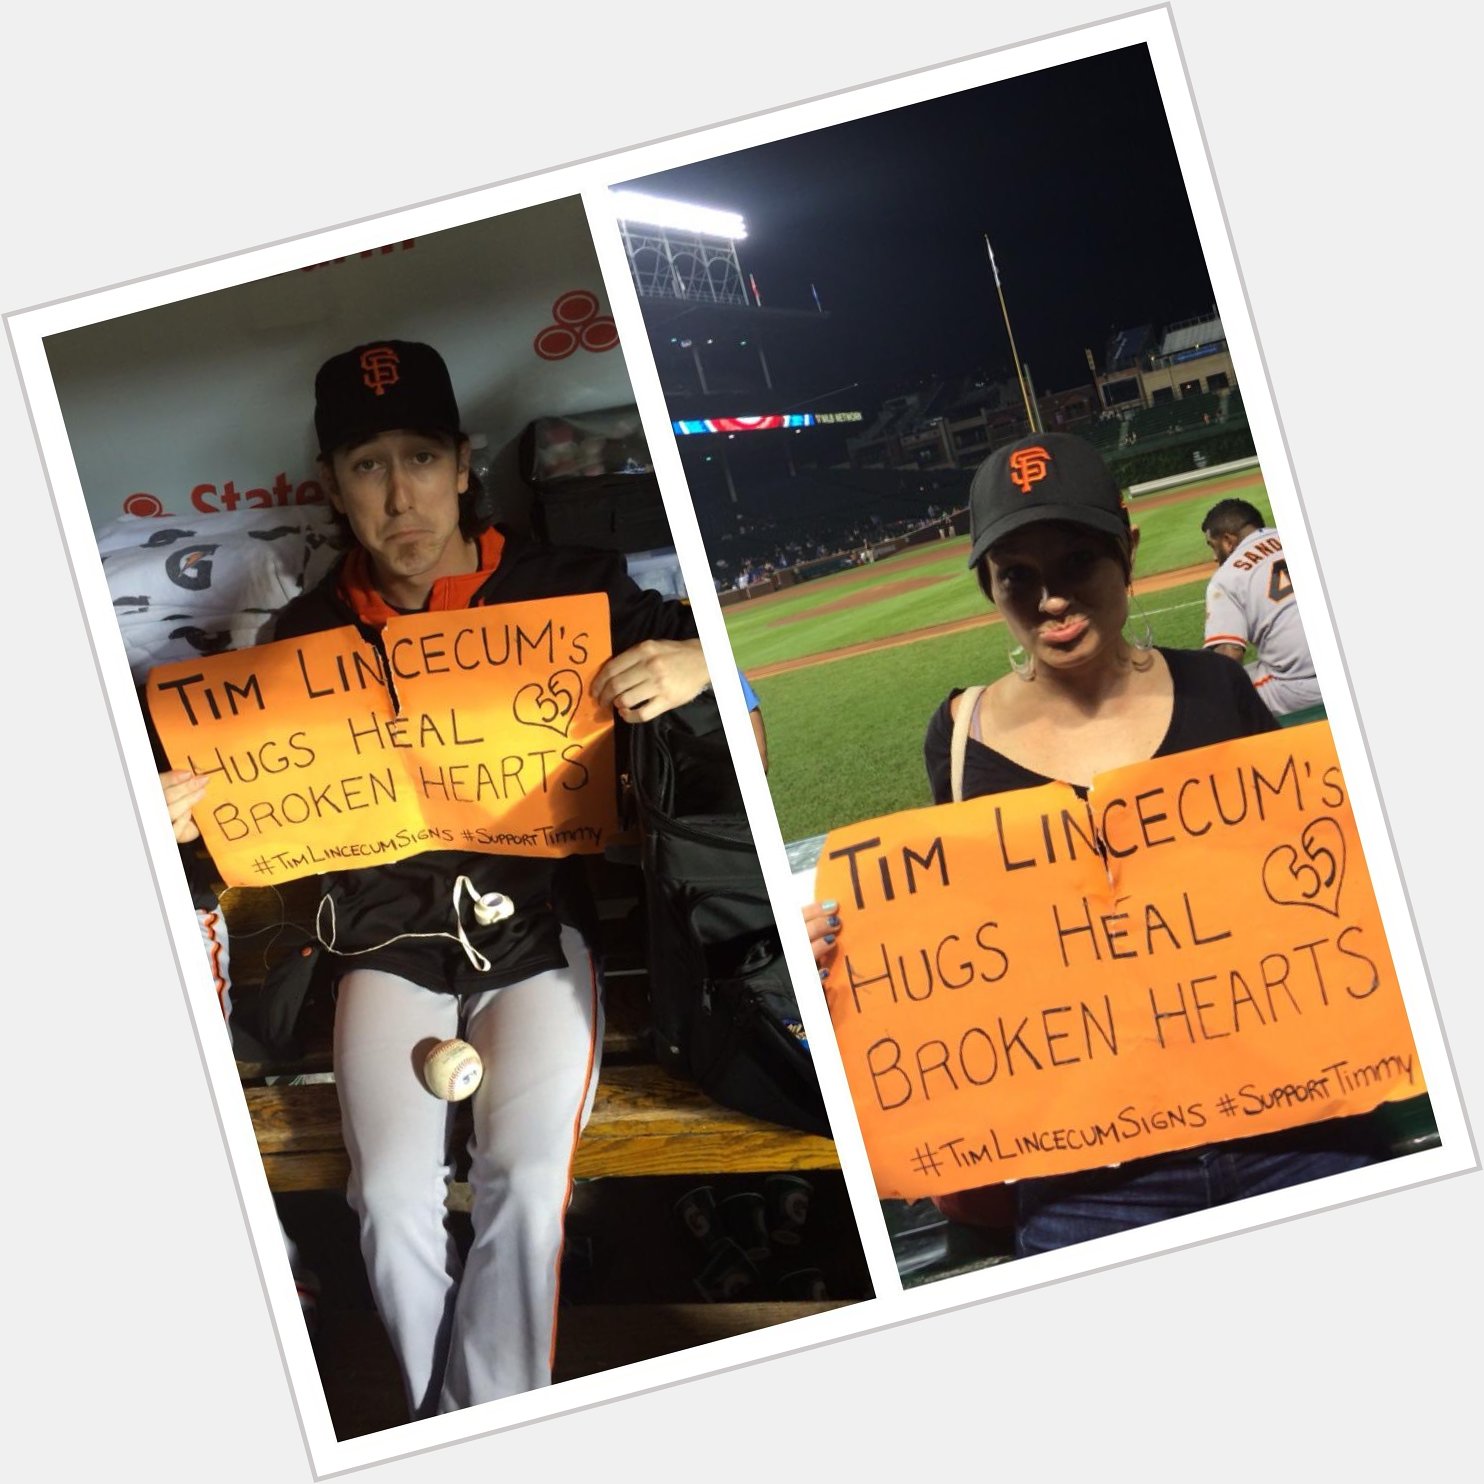 Dear Tim Lincecum, Happy birthday to us both wherever you are. 